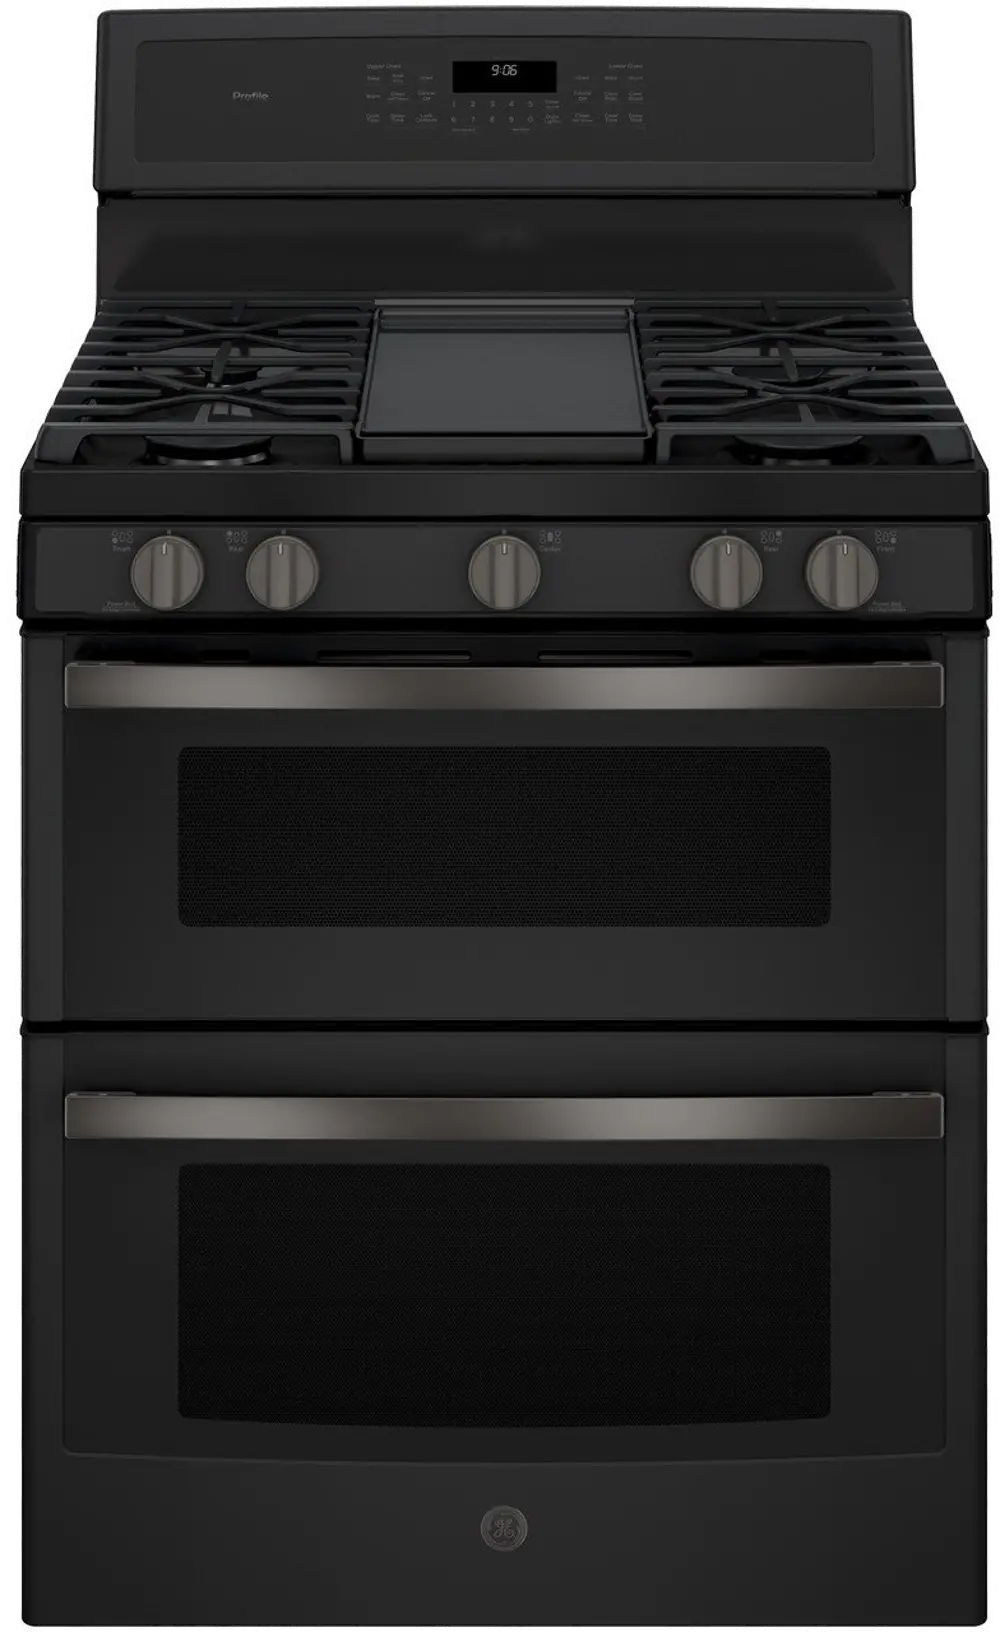 PGB960FEJDS GE Profile Front Control Slide In Double Oven Gas Range with Convection - 36 Inch, Black Slate, 6.8 cu. ft.-1